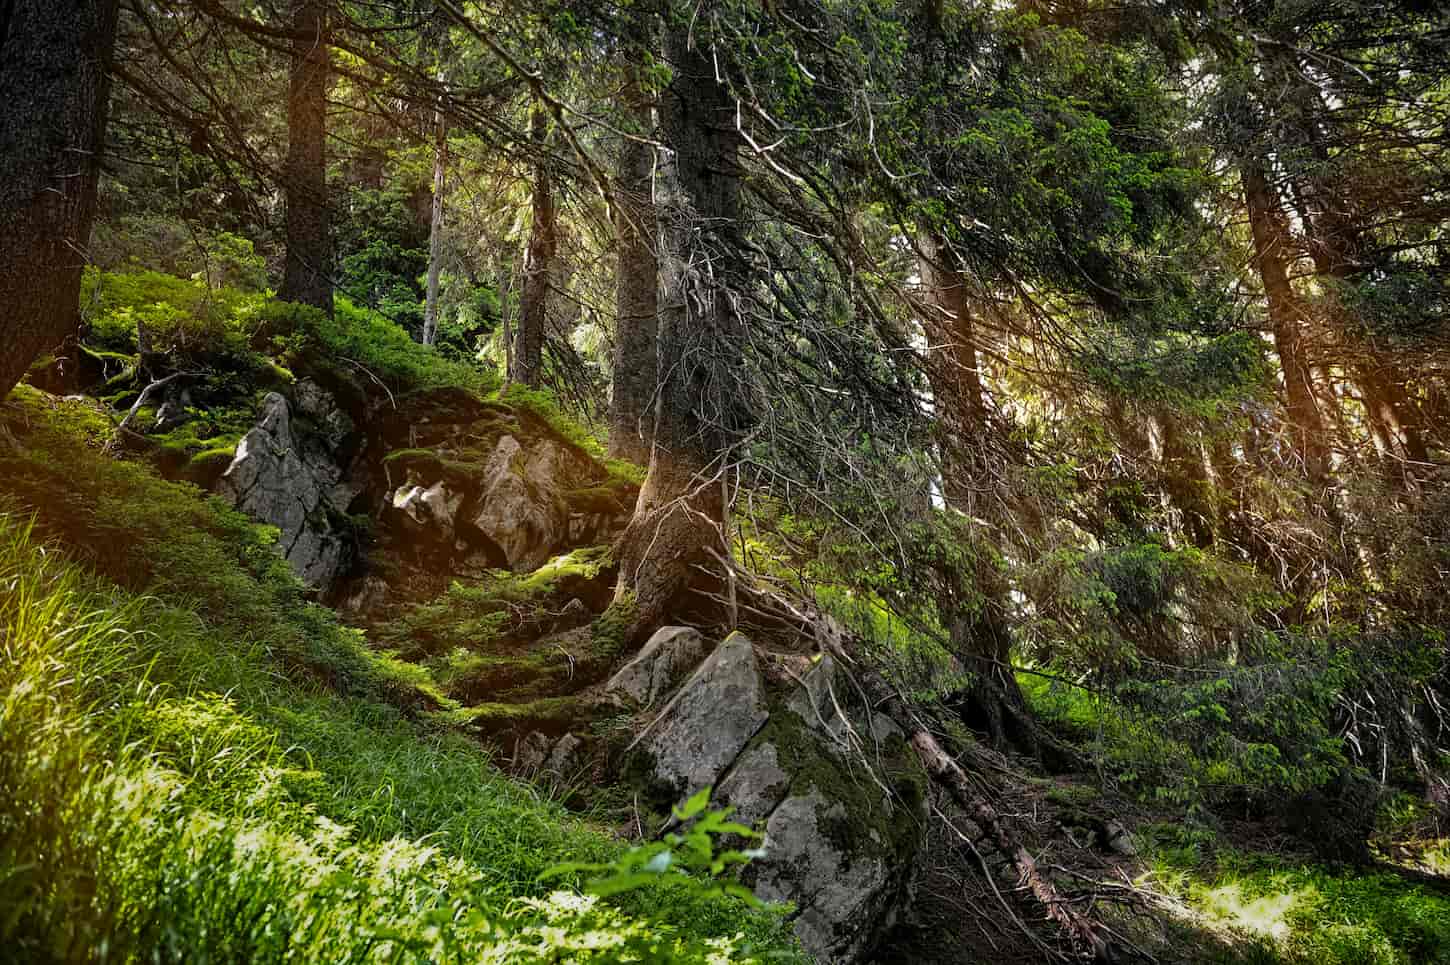 An image of a Forest landscape with sunbeams, mossy trees, and stones.